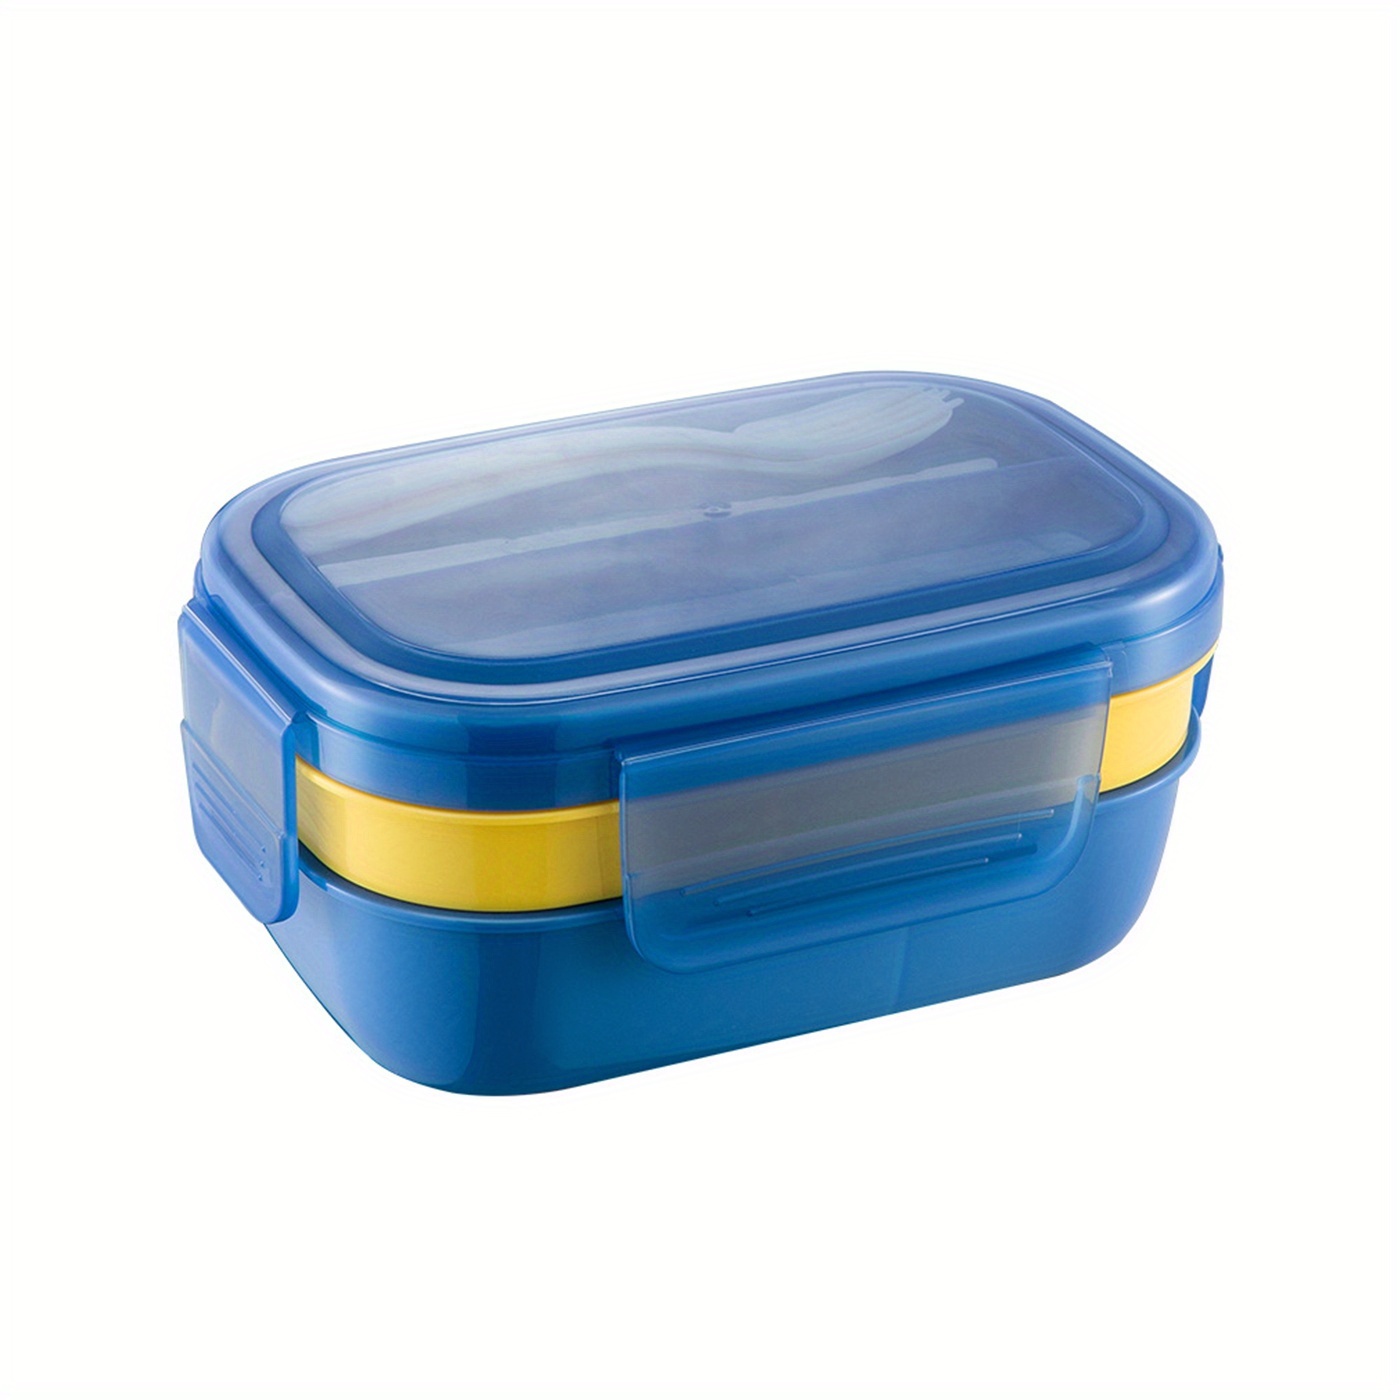 Stackable Bento Box, Adult Lunch Box, For Teenagers And Workers At School,  Back To School, 3 Layers All-in-one Lunch Containers With Multiple  Compartments, Large Capacity, Built-in Utensil Set & Bpa Free, Home